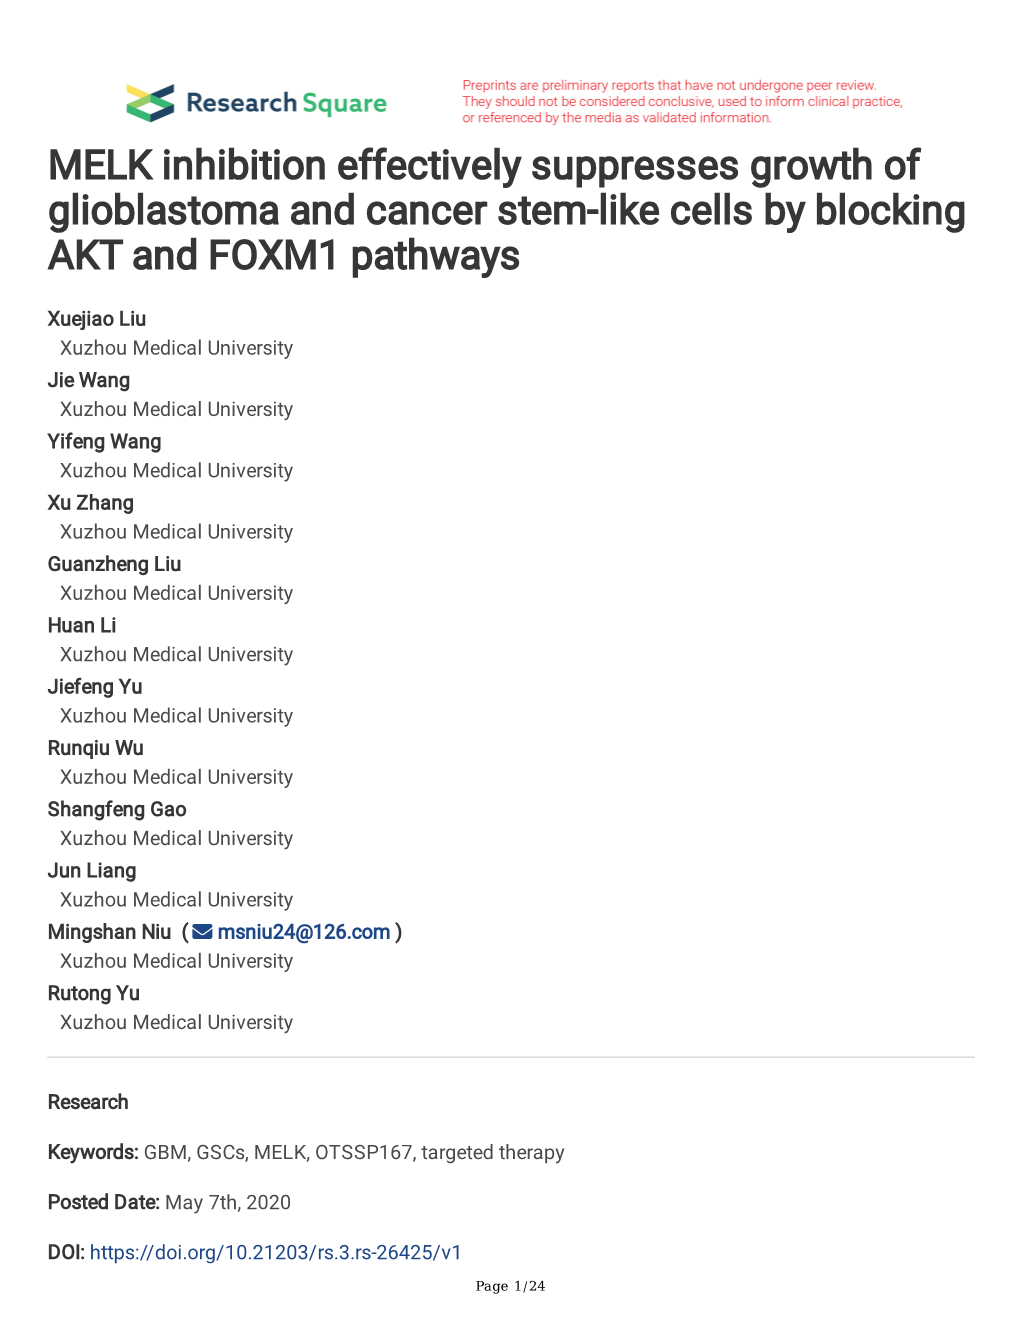 MELK Inhibition Effectively Suppresses Growth of Glioblastoma and Cancer Stem-Like Cells by Blocking AKT and FOXM1 Pathways